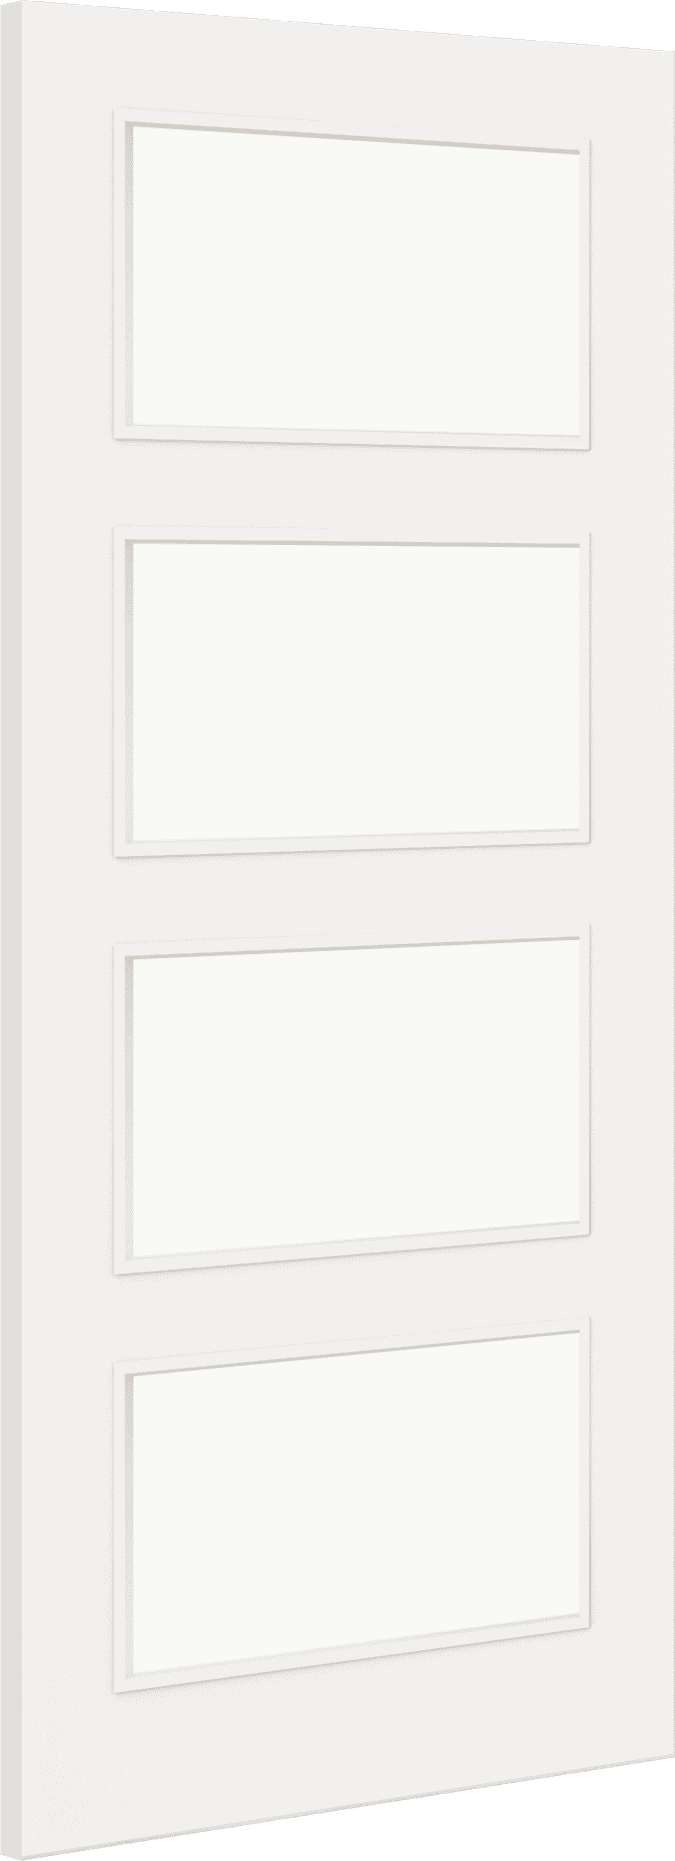 2040mm x 926mm x 44mm Architectural Paint Grade White 04 Clear Glazed Fire Door Blank